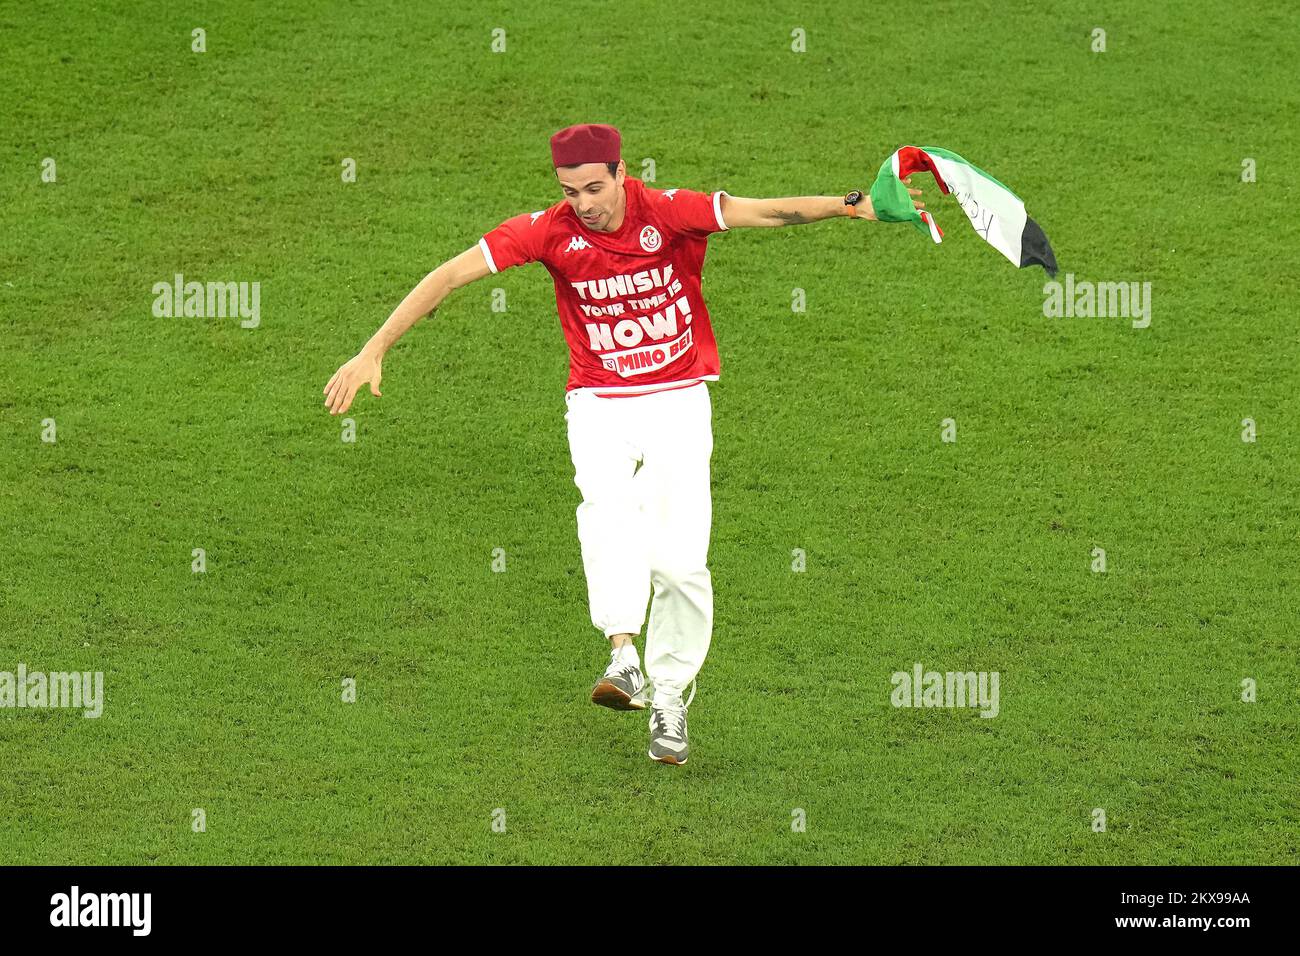 A pitch invader with a t-shirt that reads 'Tunisia Your Time is Now!' runs onto the pitch while holding during the FIFA World Cup Group D match at the Education City Stadium in Al Rayyan, Qatar. Picture date: Wednesday November 30, 2022. Stock Photo